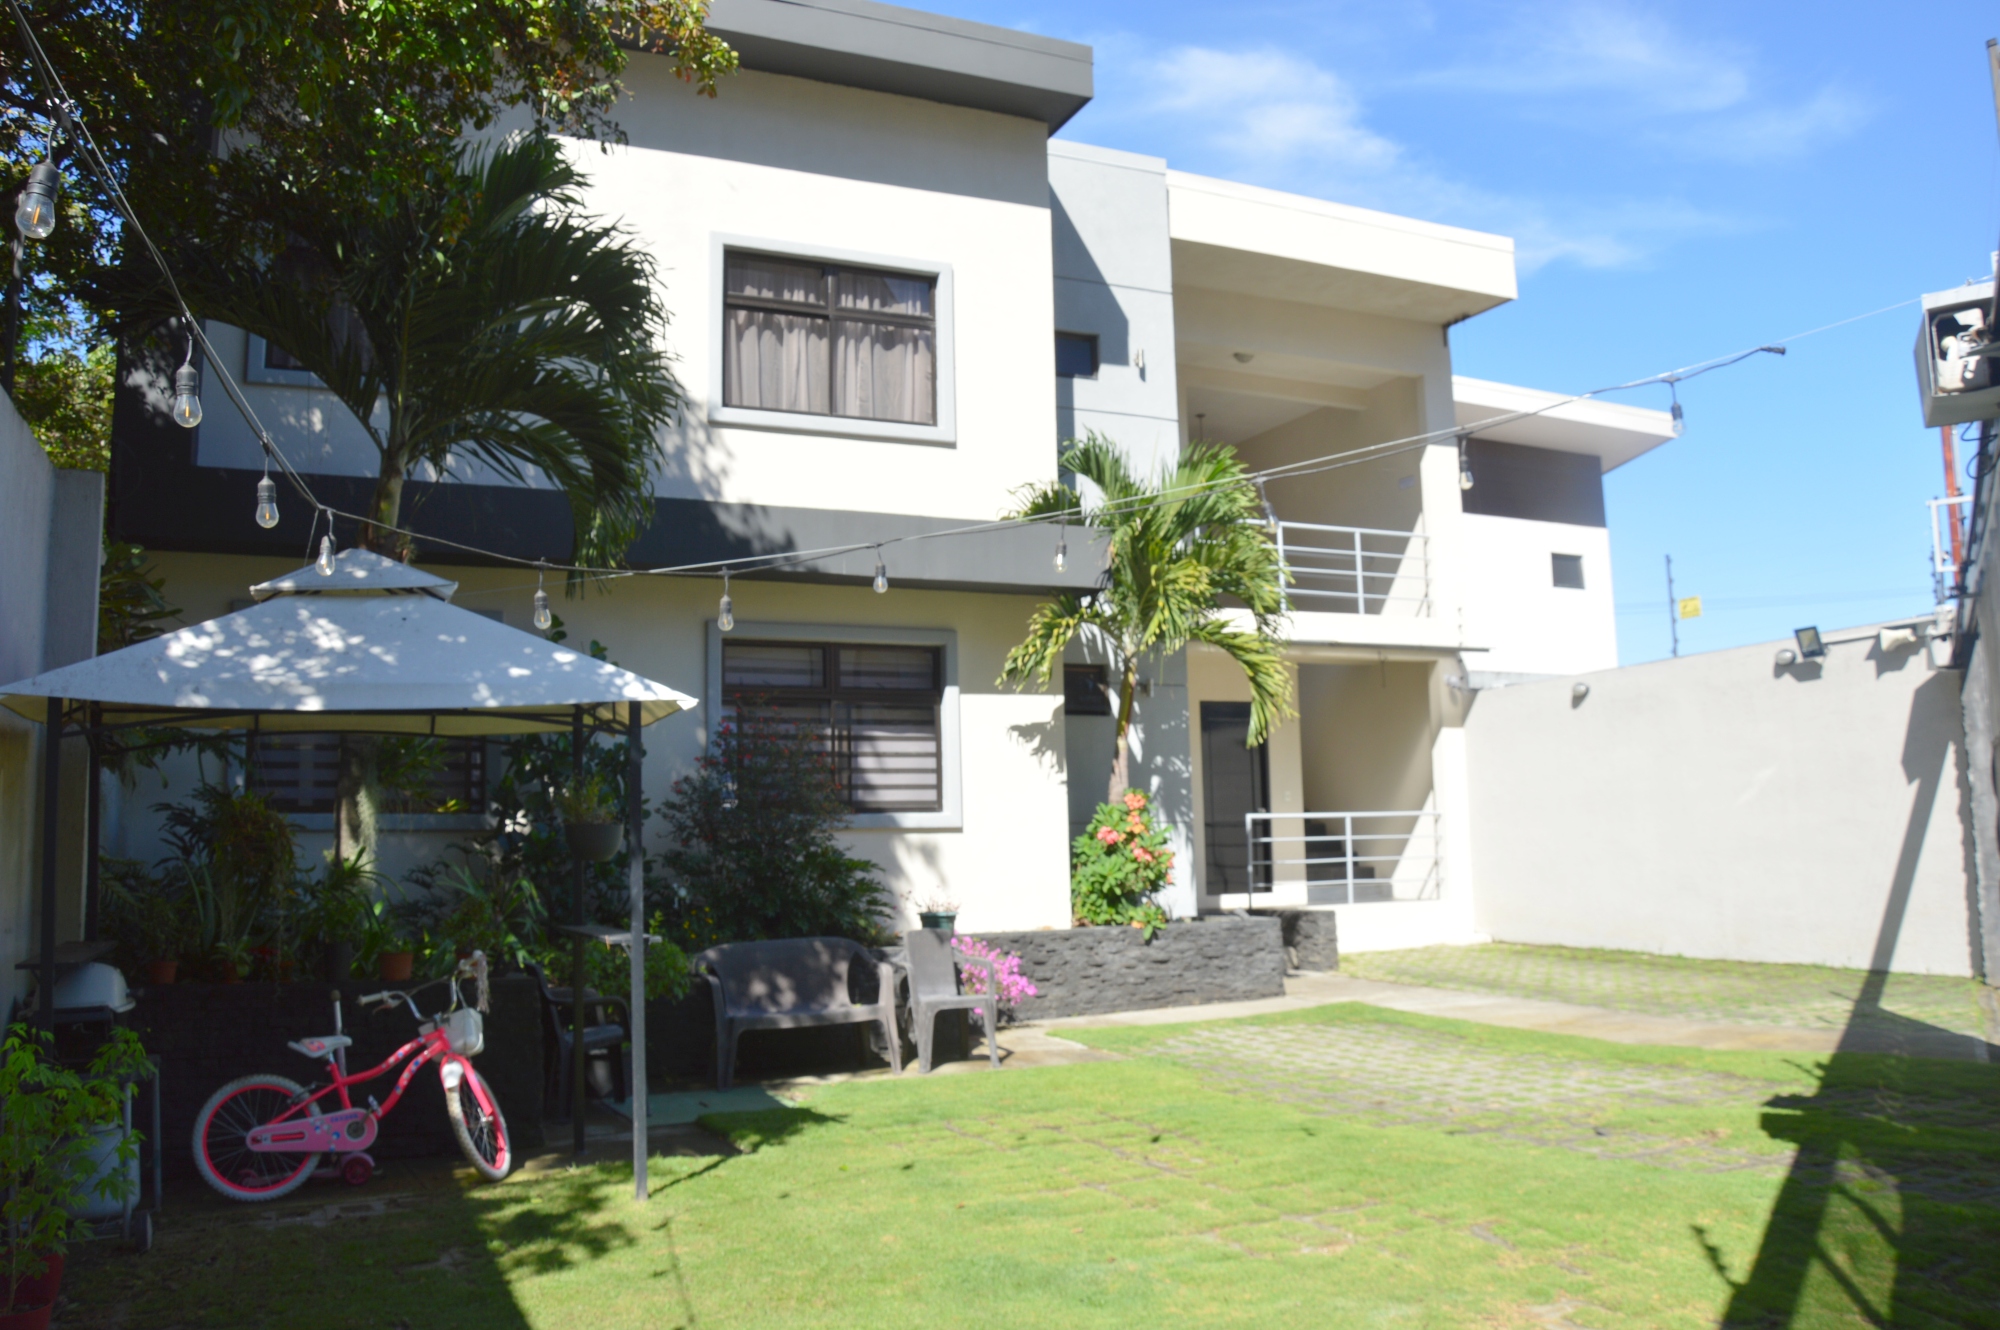 Location, Location, Location, 2 Br Modern Apartment in the city of Alajuela